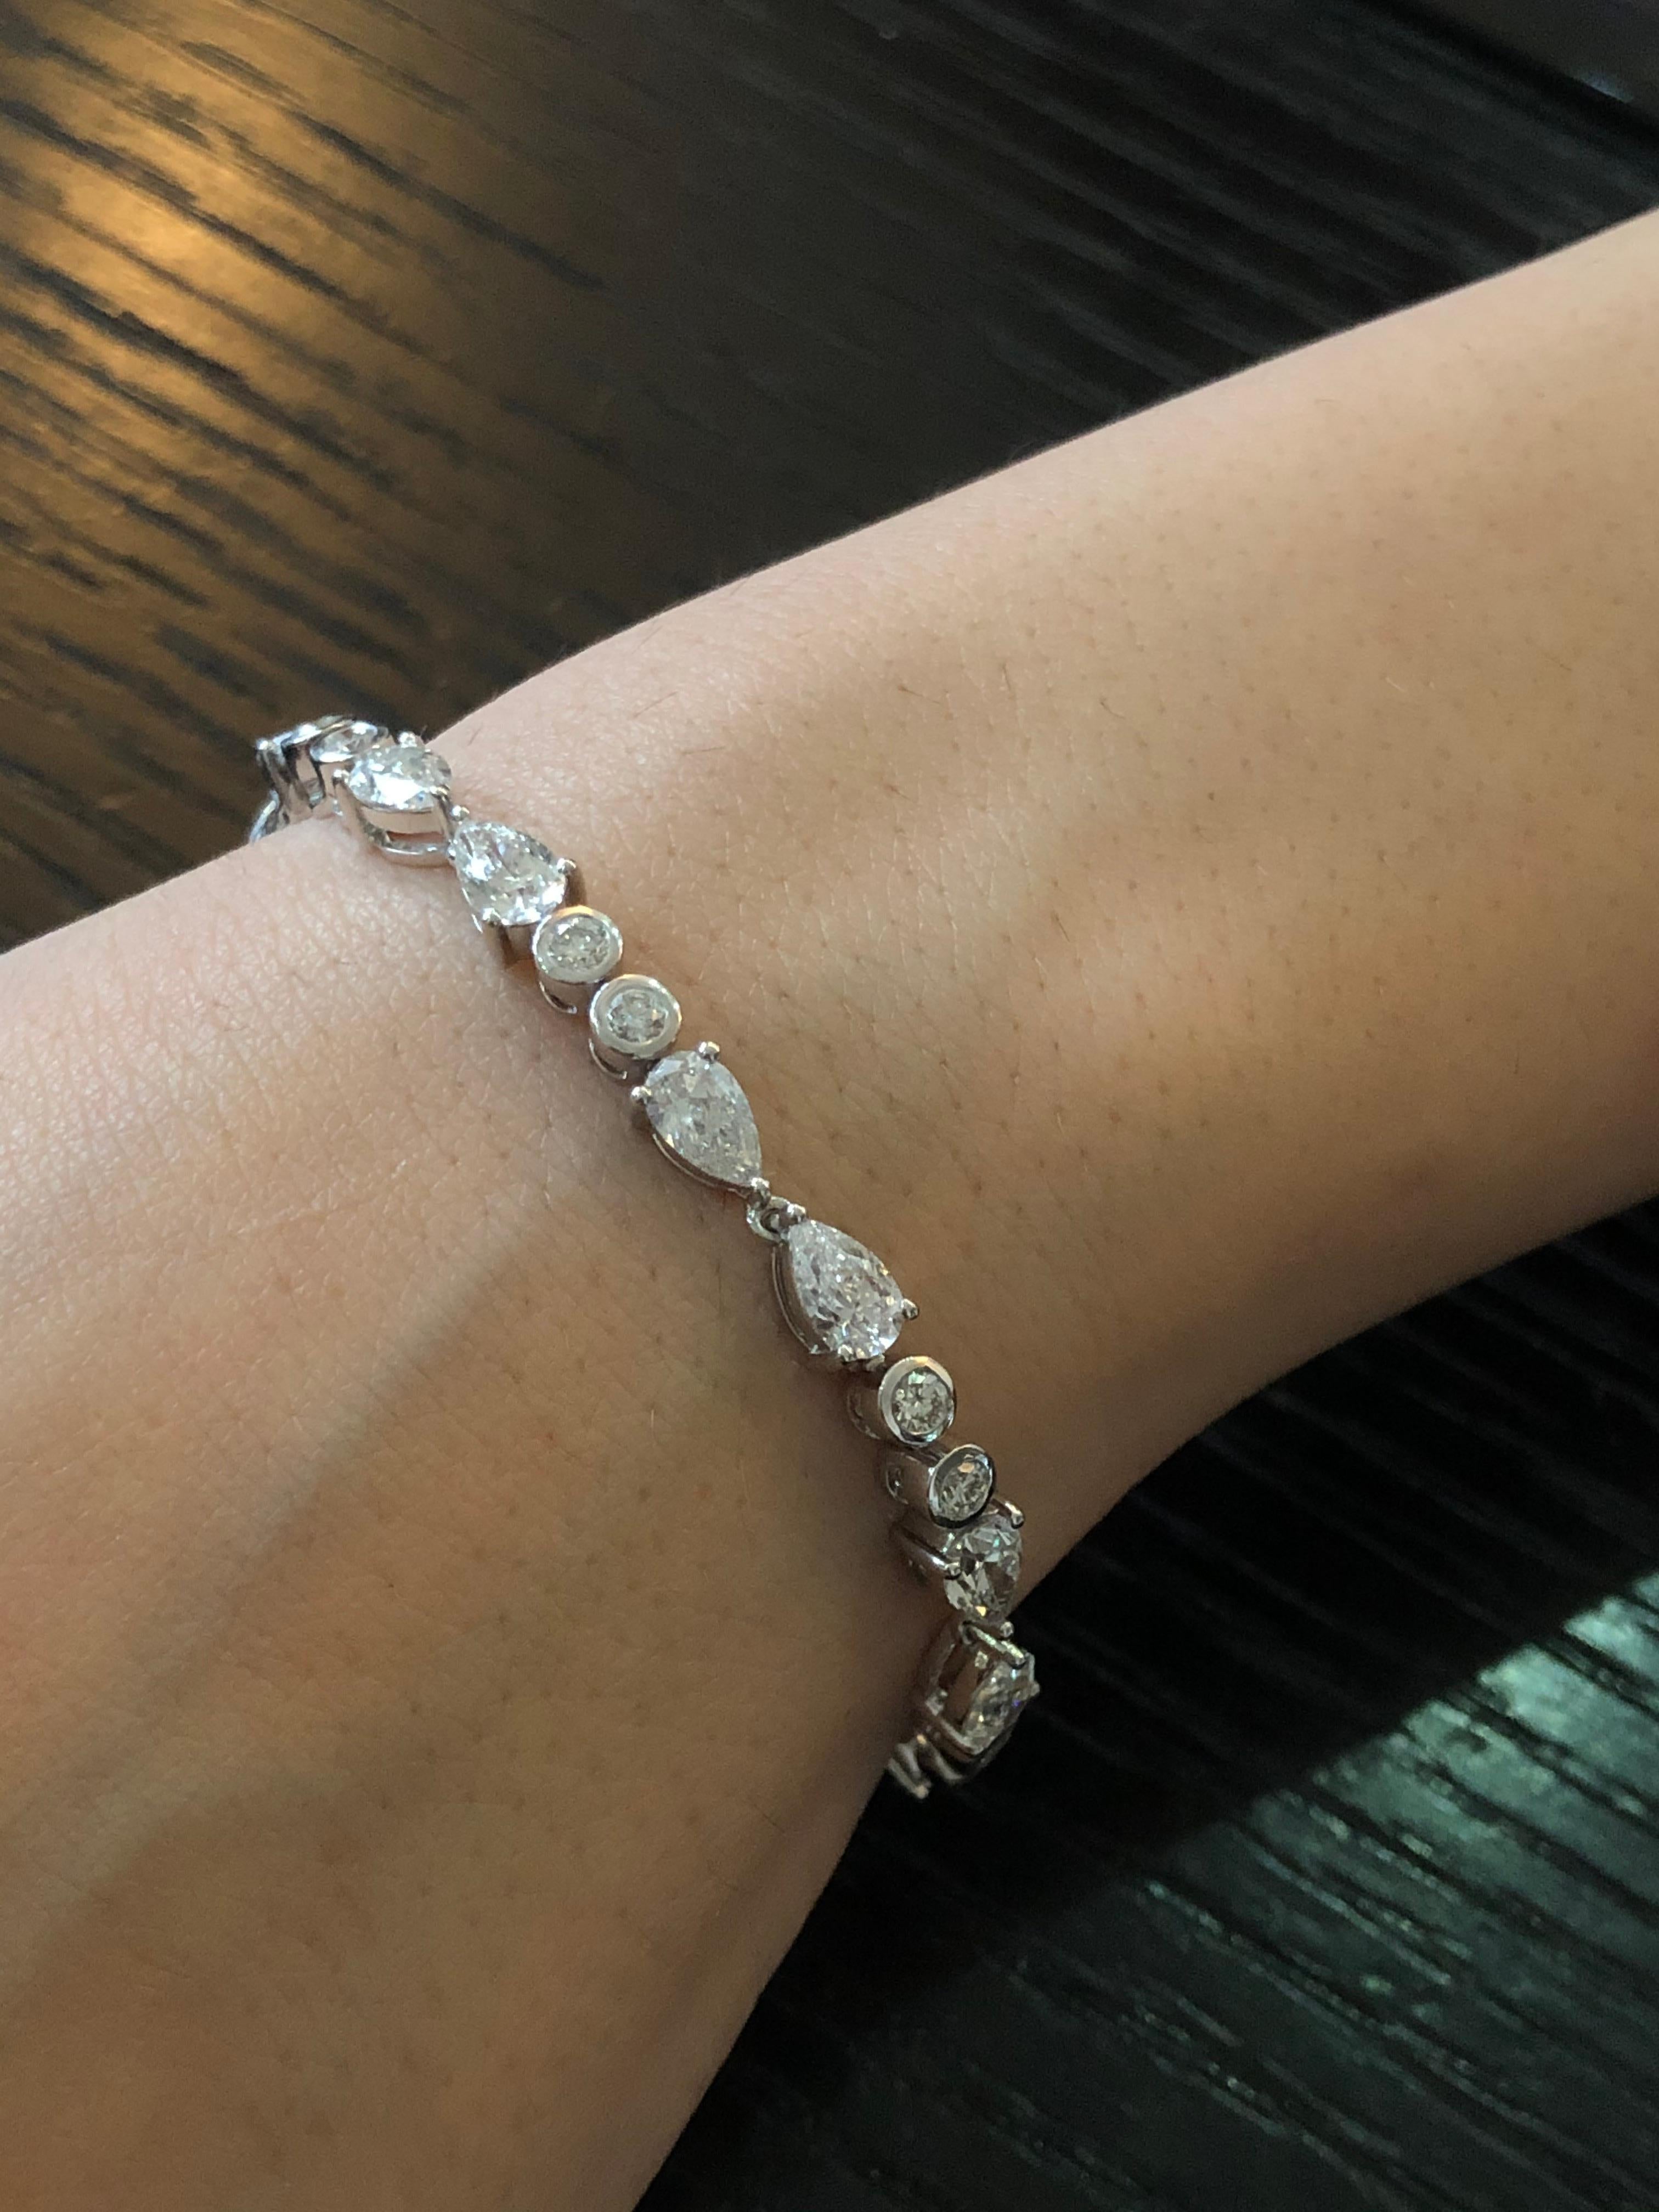 Diamond: 7.07 carats
Gold: 13.596 grams 18k
Colour: GH
Clarity: SI1
Note: This piece can be altered according to the wrist size 
Aways have a dazzling surprise up your sleeve with this stunning diamond bracelet 
item code: DBR-D@C